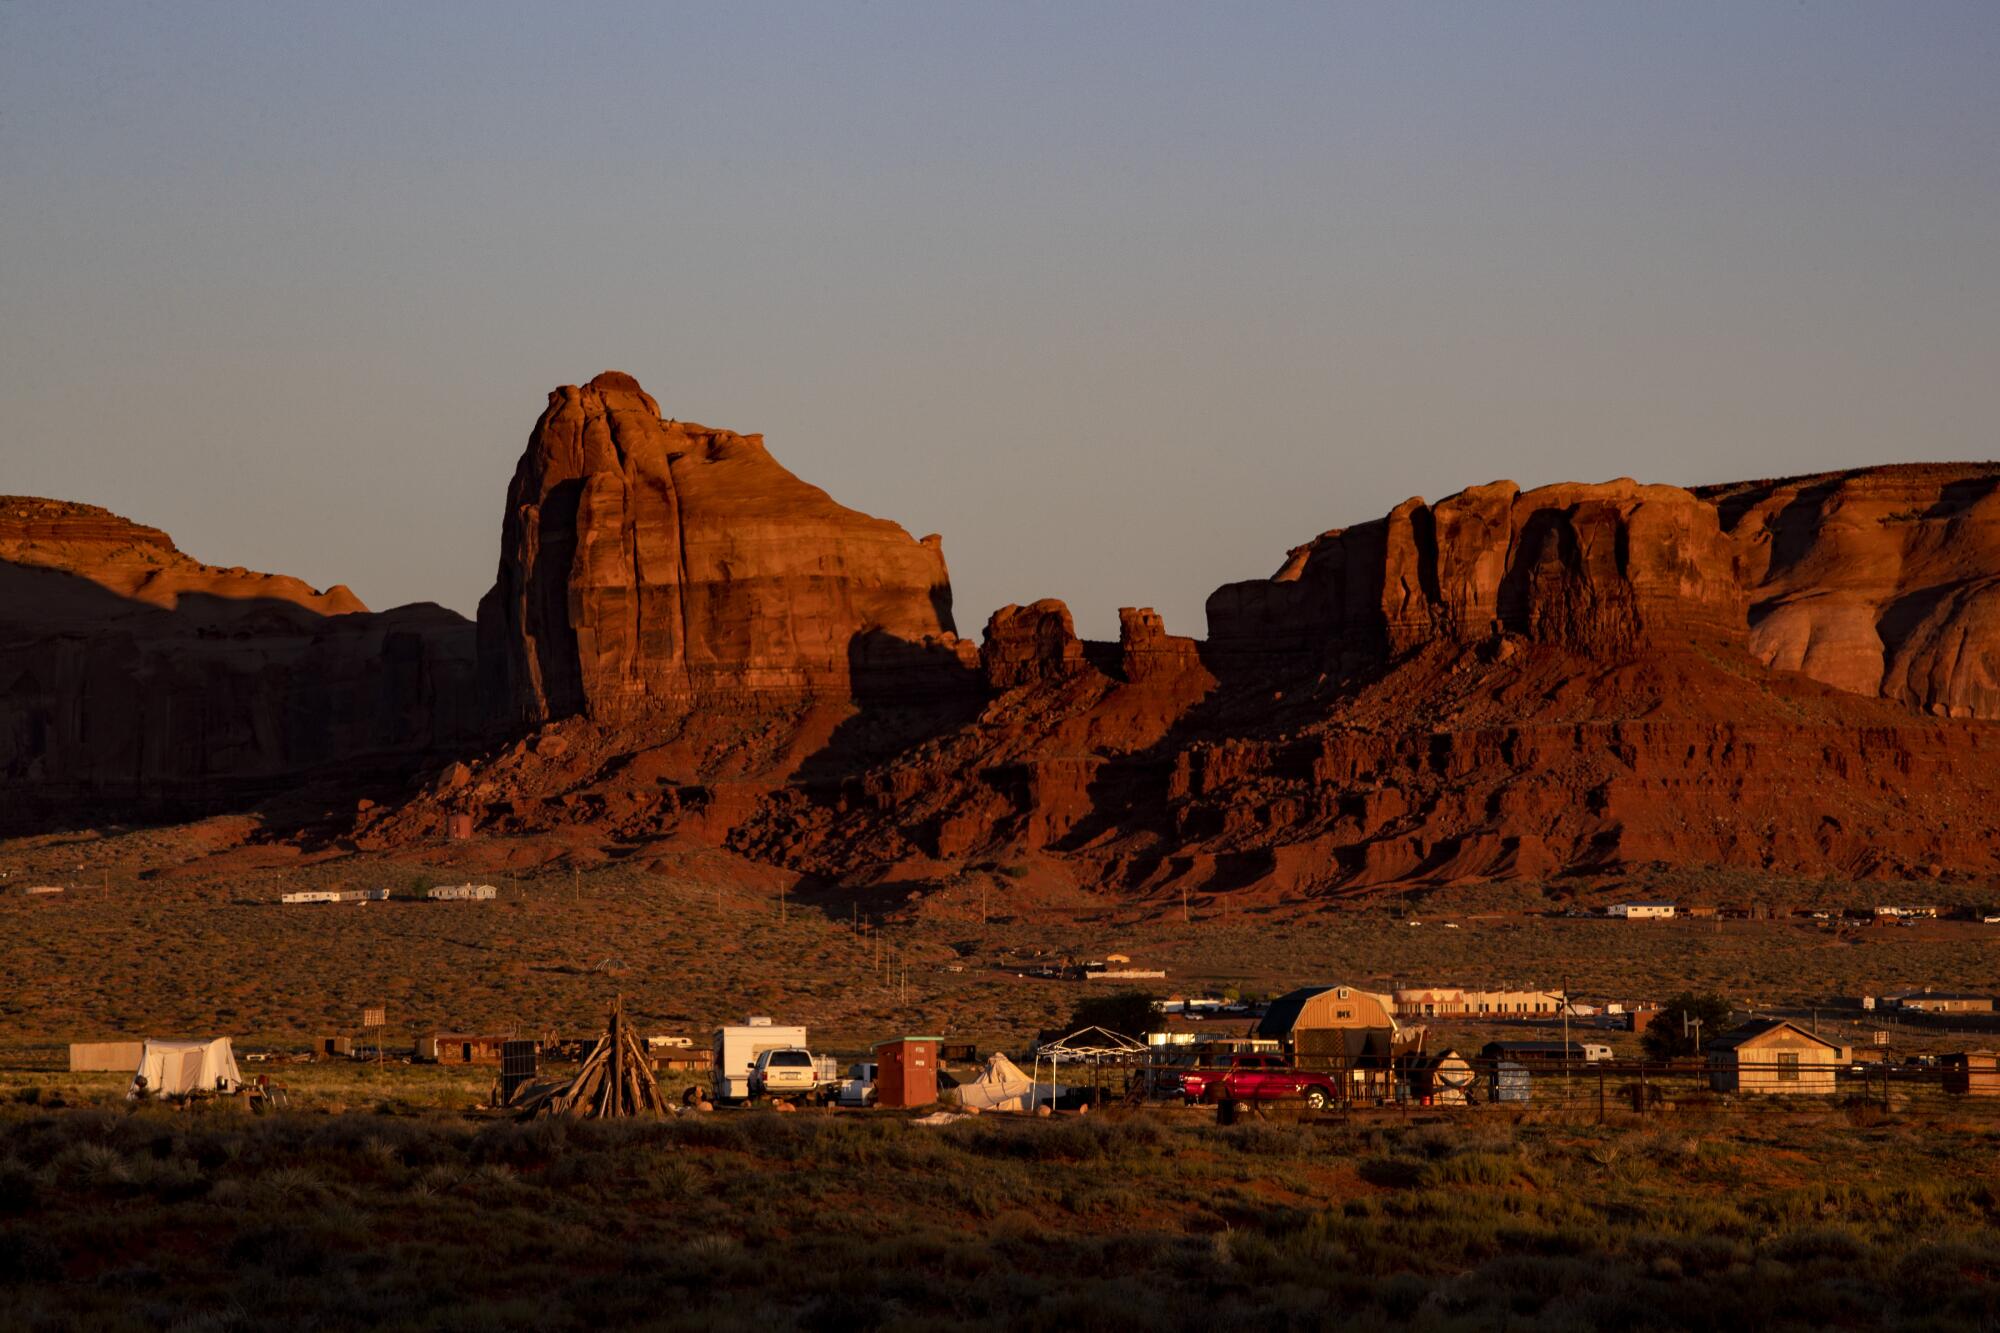 Dawn breaks over homes and sandstone formations near the Monument Valley Navajo Tribal Park